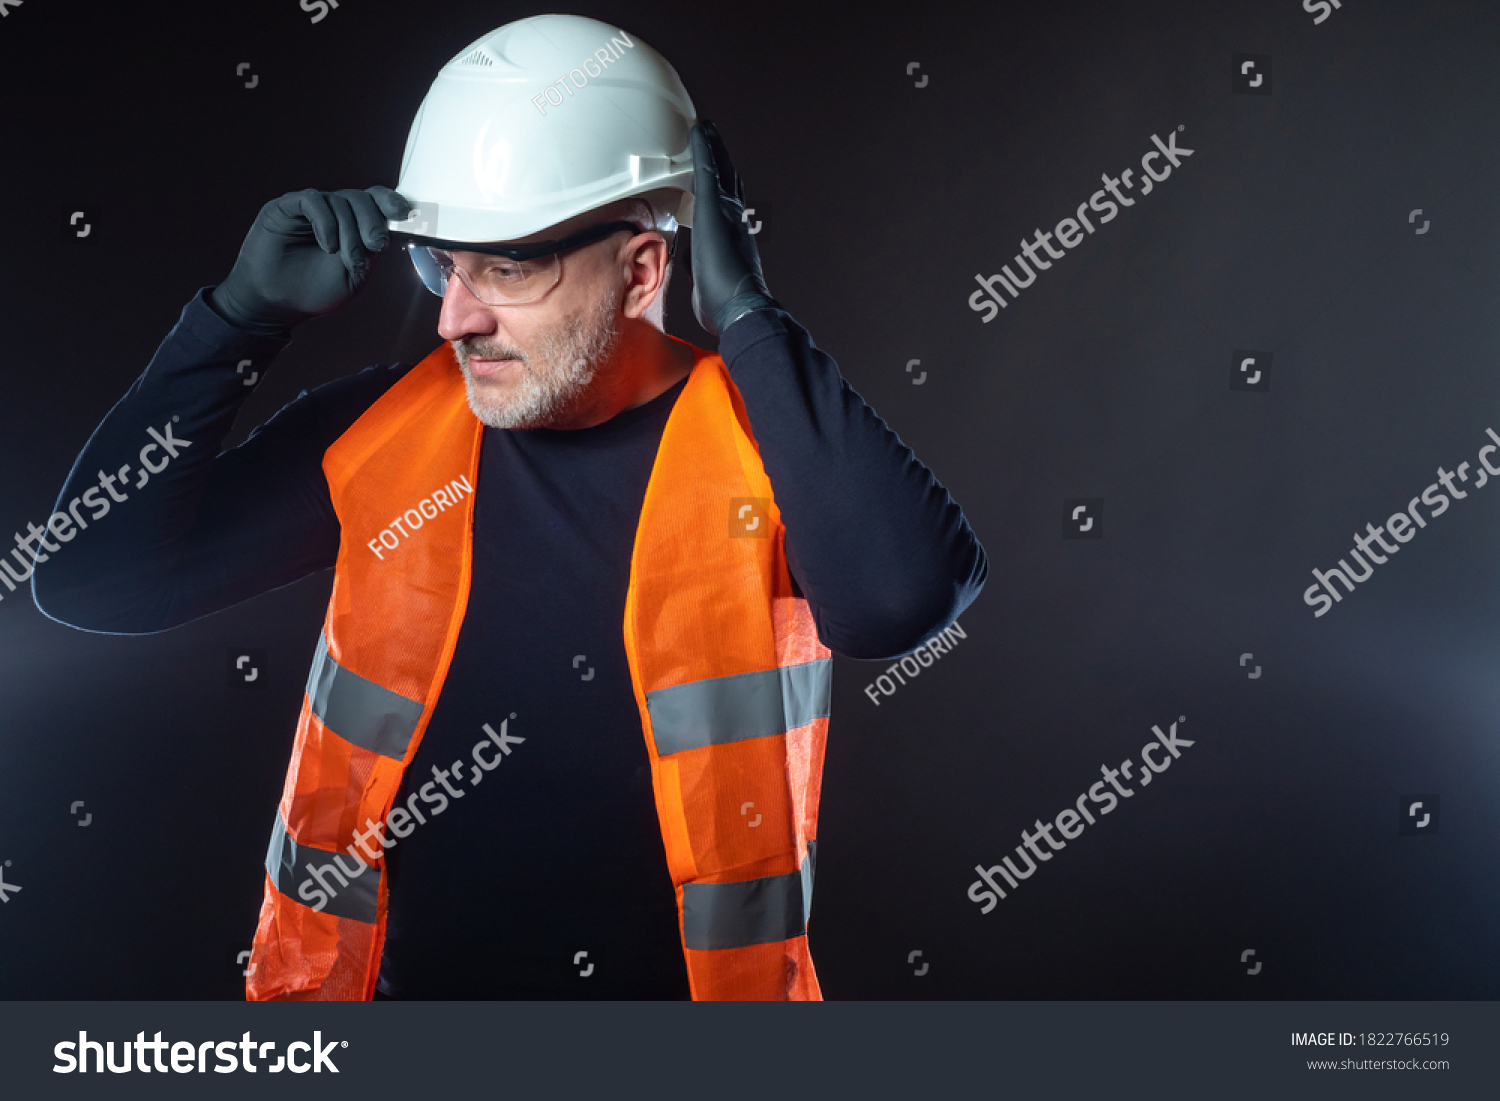 Portrait of the Builder on a dark background. A man in an orange vest puts a white construction helmet on his head. Construction uniforms. Jobs at the construction site. Place for text. #1822766519